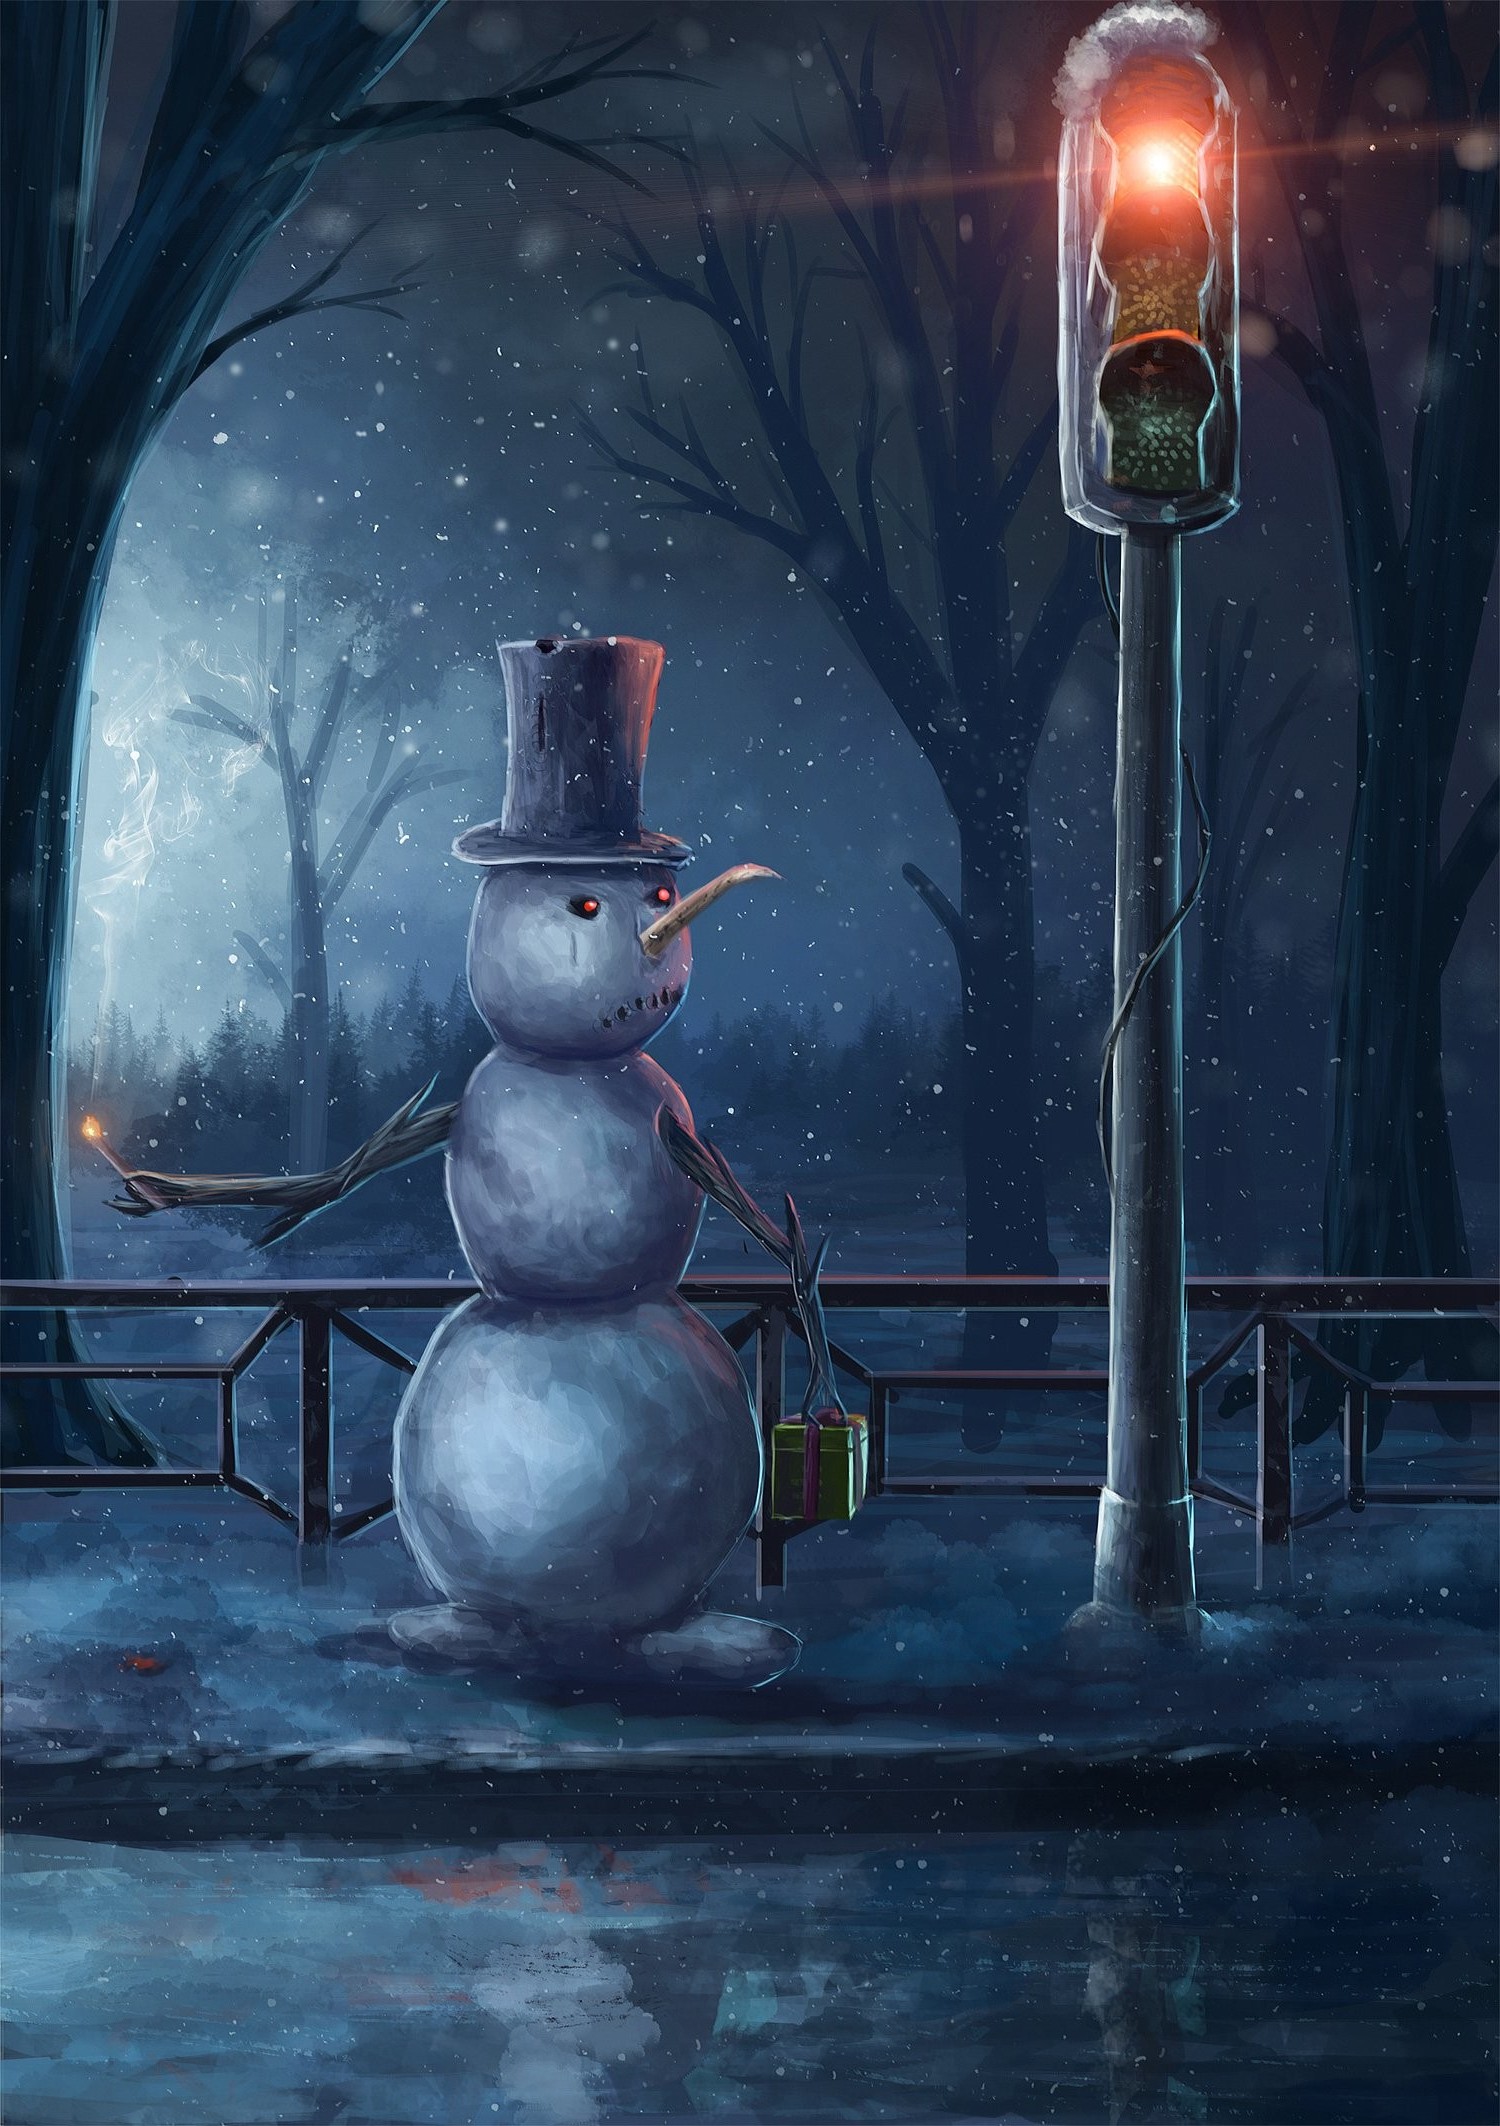 drawing, Snow, Winter, Snowman, Top hats, Branch, Snowflakes, Traffic